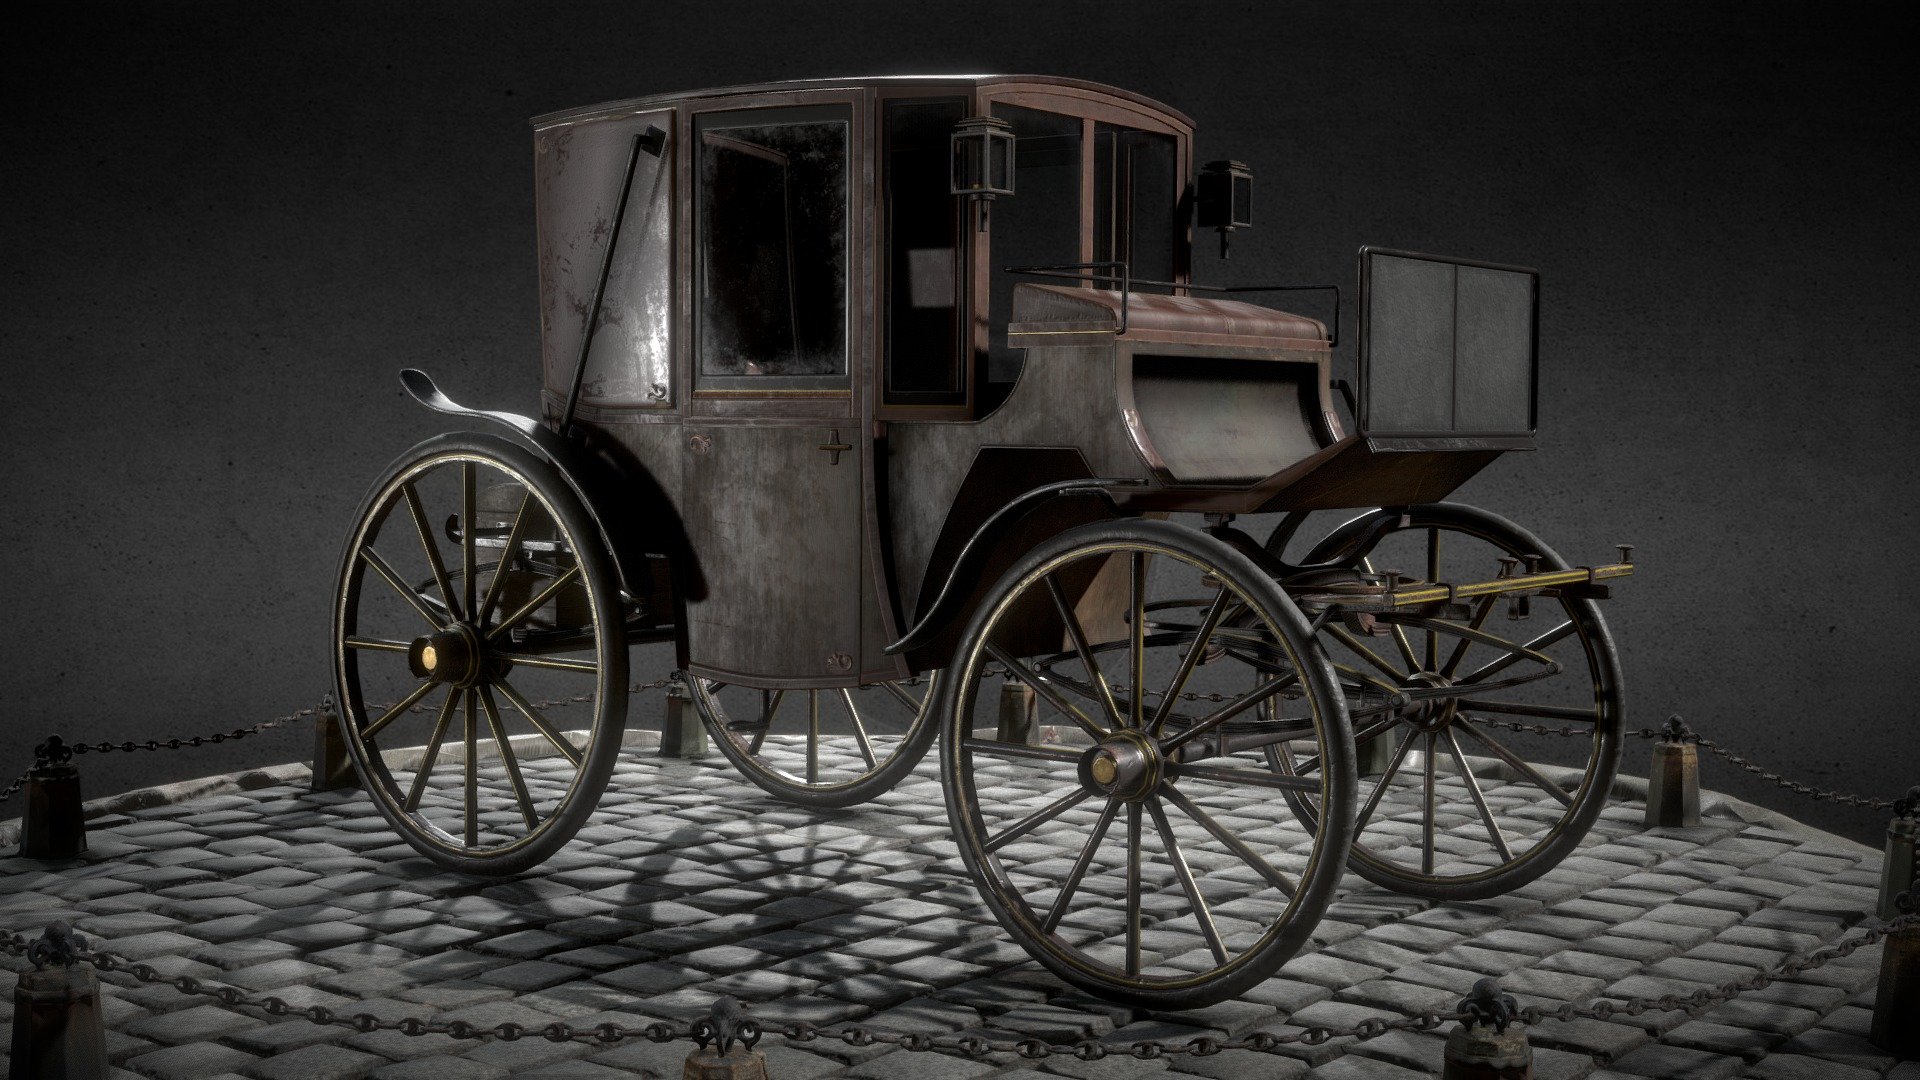 —General Information—
Based on Brougham Carriage, built in the 19 century.
Lowpoly and optimized for modern game engines. High quality textures(PBR), optimized for Unity 5 and UE4(Included MRAO)

—Texture Information— (4 sets in .tga)

General PBR textures: BaseColor, Metallic, Roughness, Normal, AO, Opacity
Unity 5 Textures: Albedo, MetallicSmoothness, Normal
Unreal Engine 4 textures: BaseColor, OcclusionRoughnessMetallic, Normal

—Model Information—
- Polycount: 19 284 Tris - Brougham Carriage - Game Ready 3D Model - Buy Royalty Free 3D model by Szymon Kardaczynski (@kardaczynski) 3d model